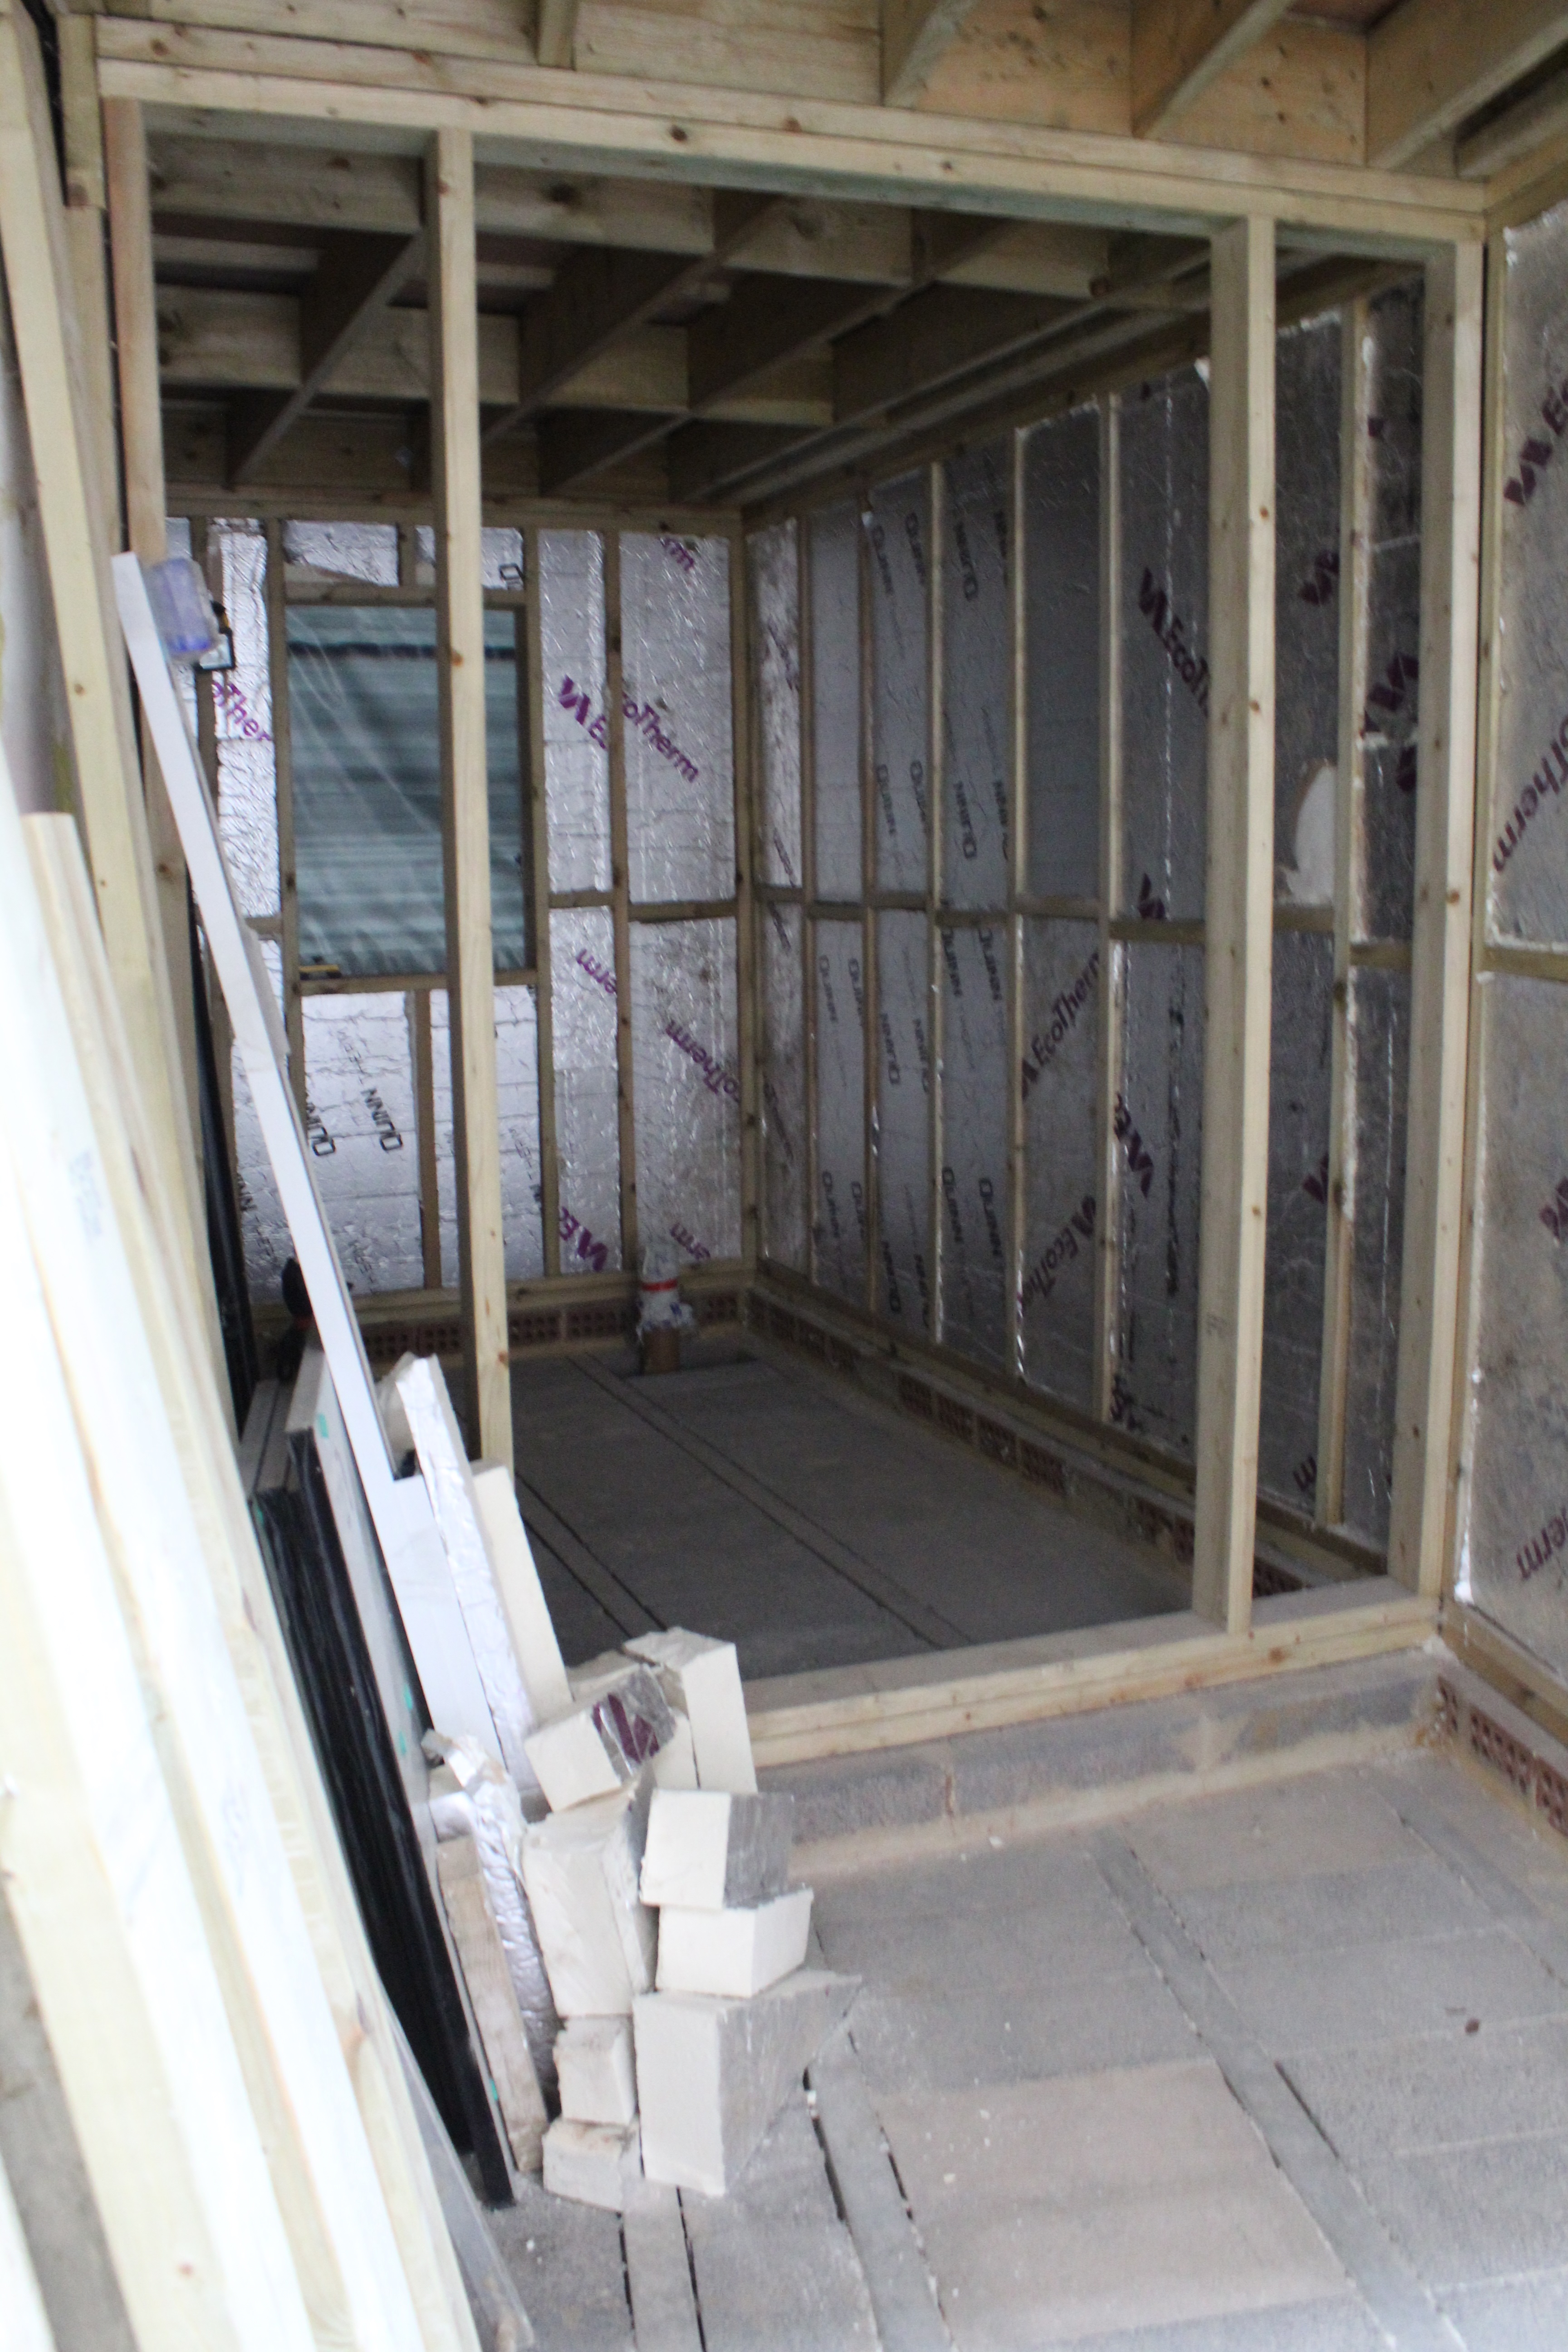 View of the internal insulation for new bathroom and window positioning